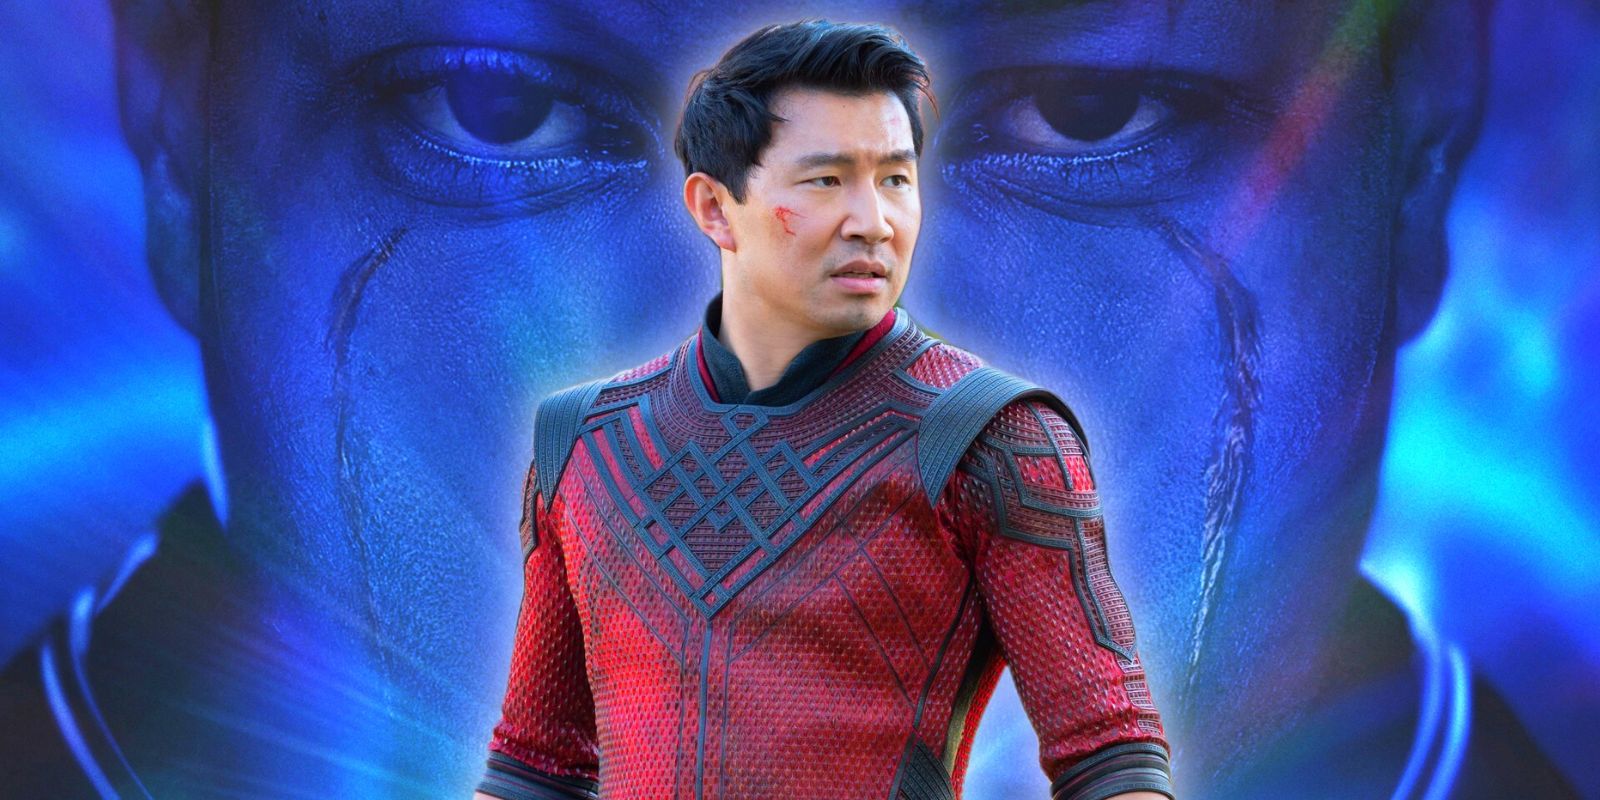 Avengers: The Kang Dynasty Lost Its Director, But It Just Took An